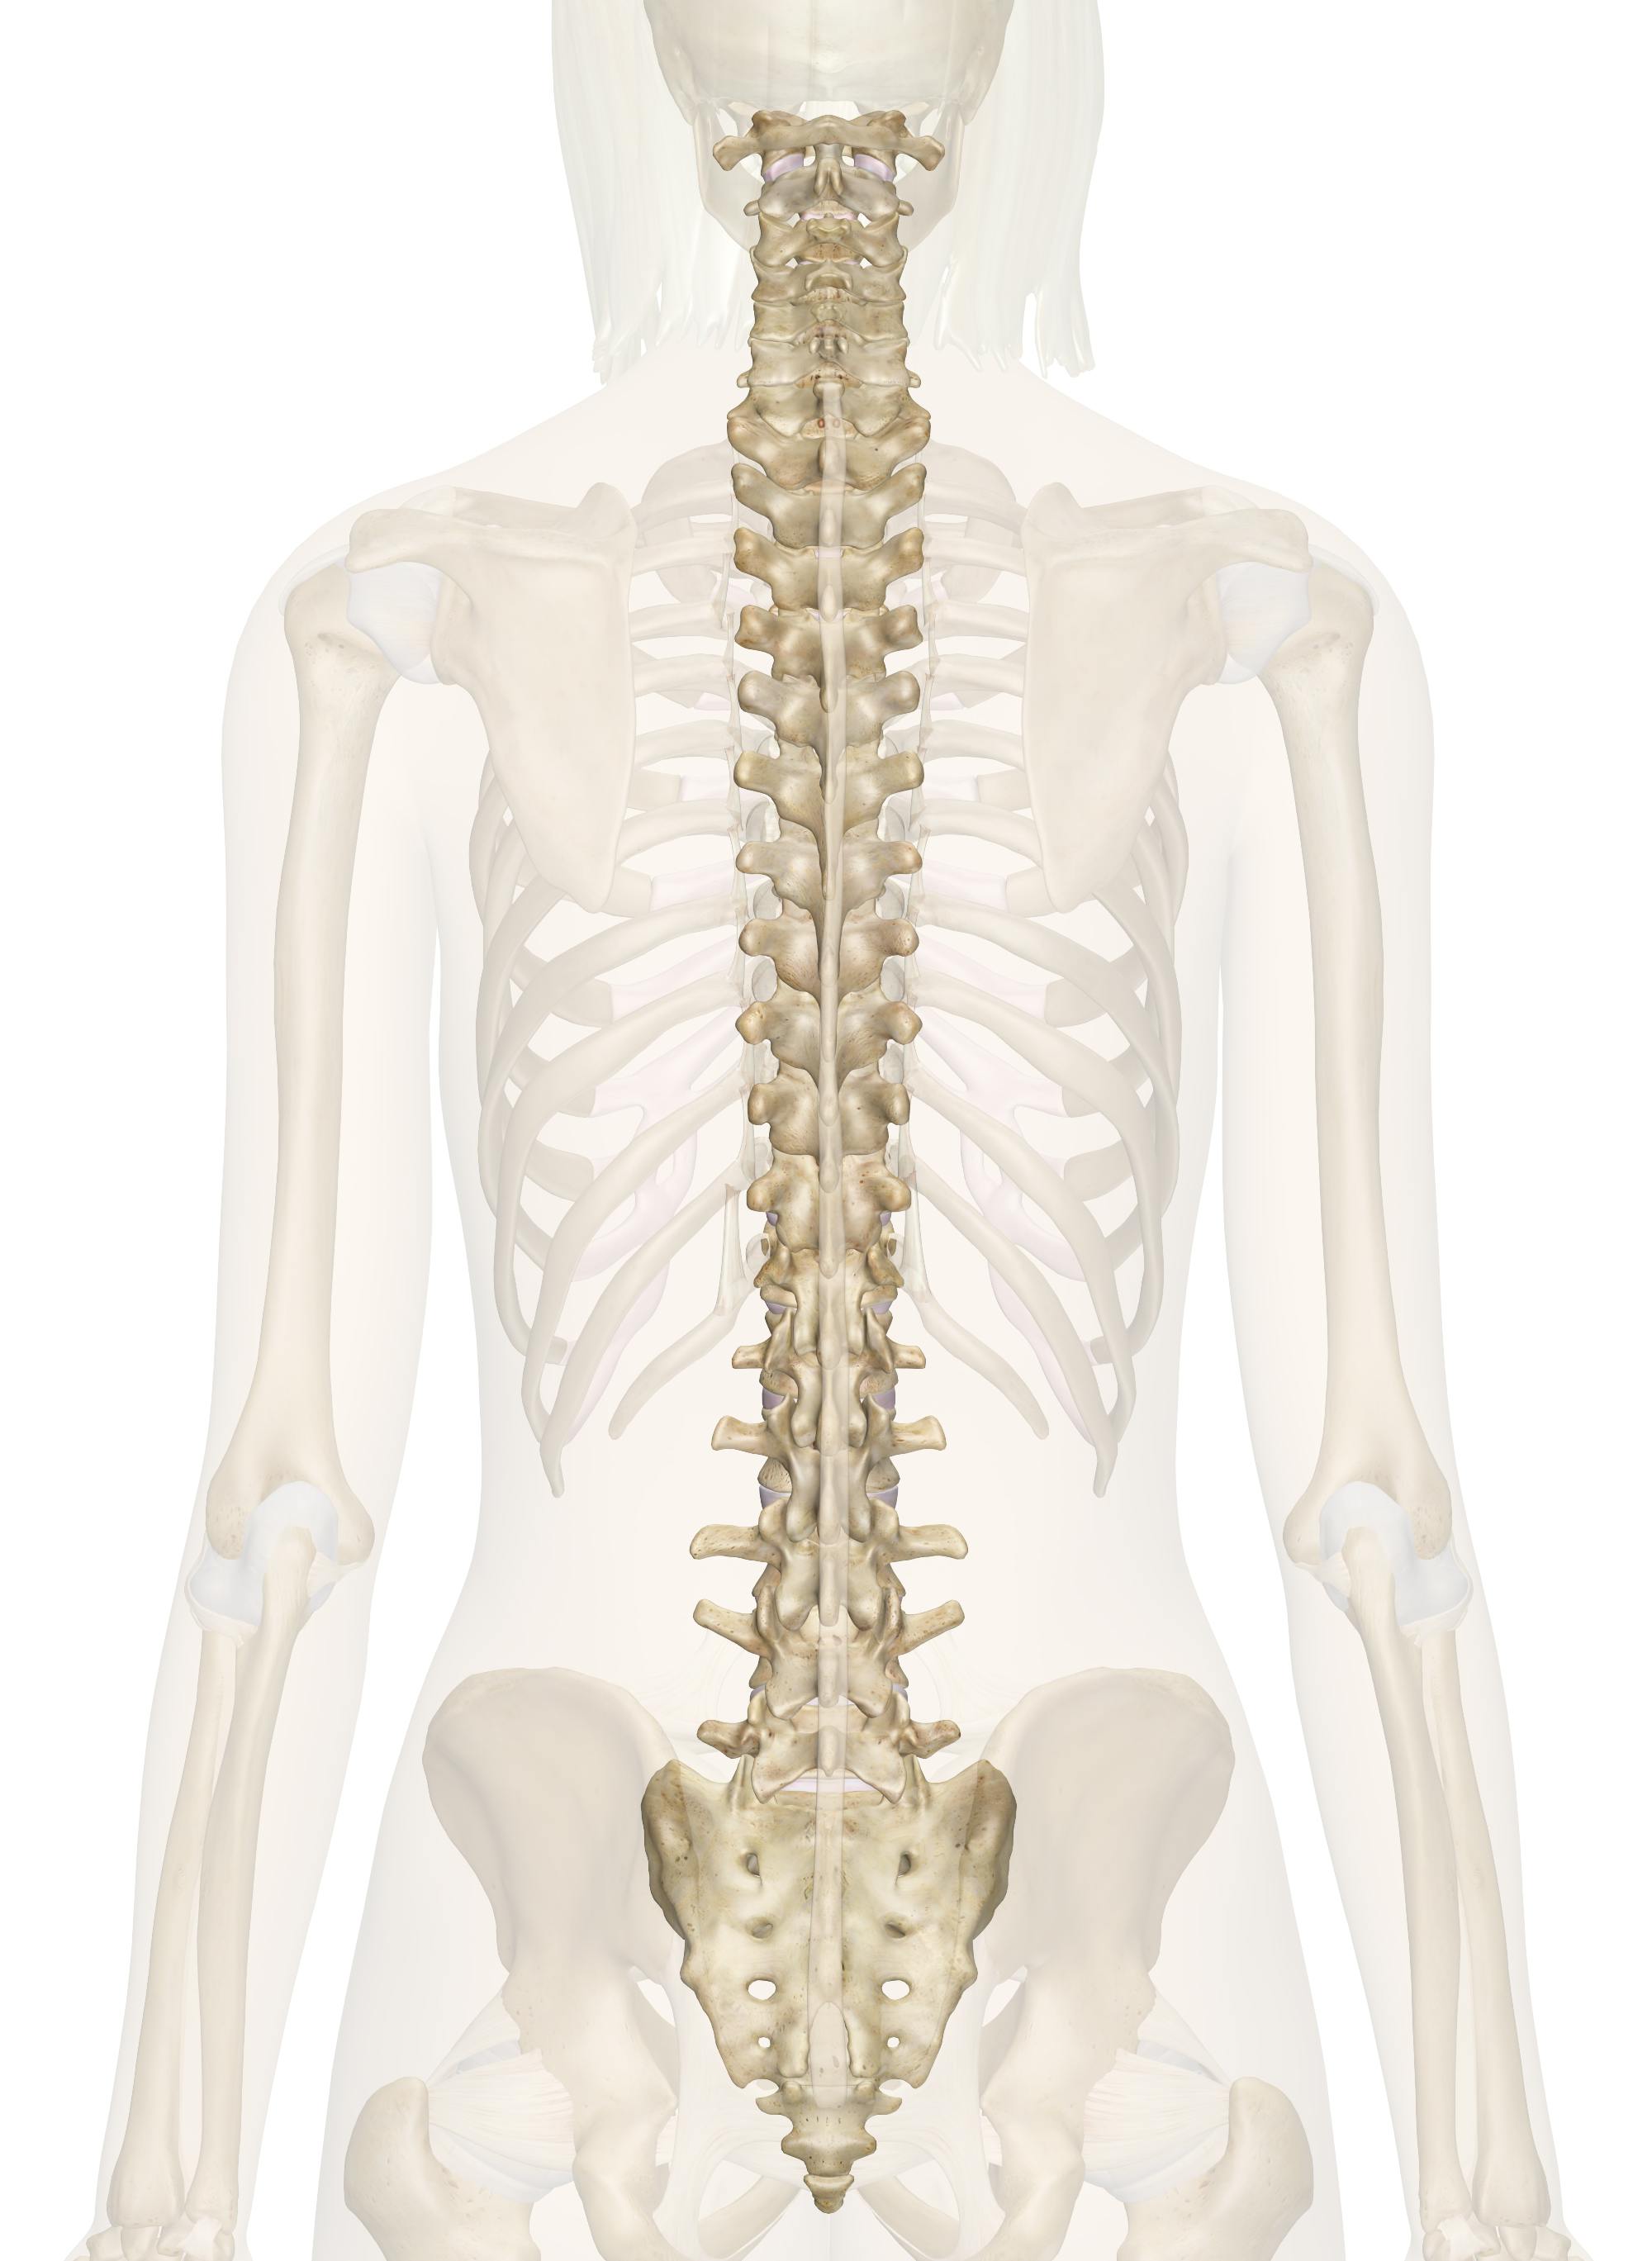 The Spinal Column Anatomy and 3D Illustrations